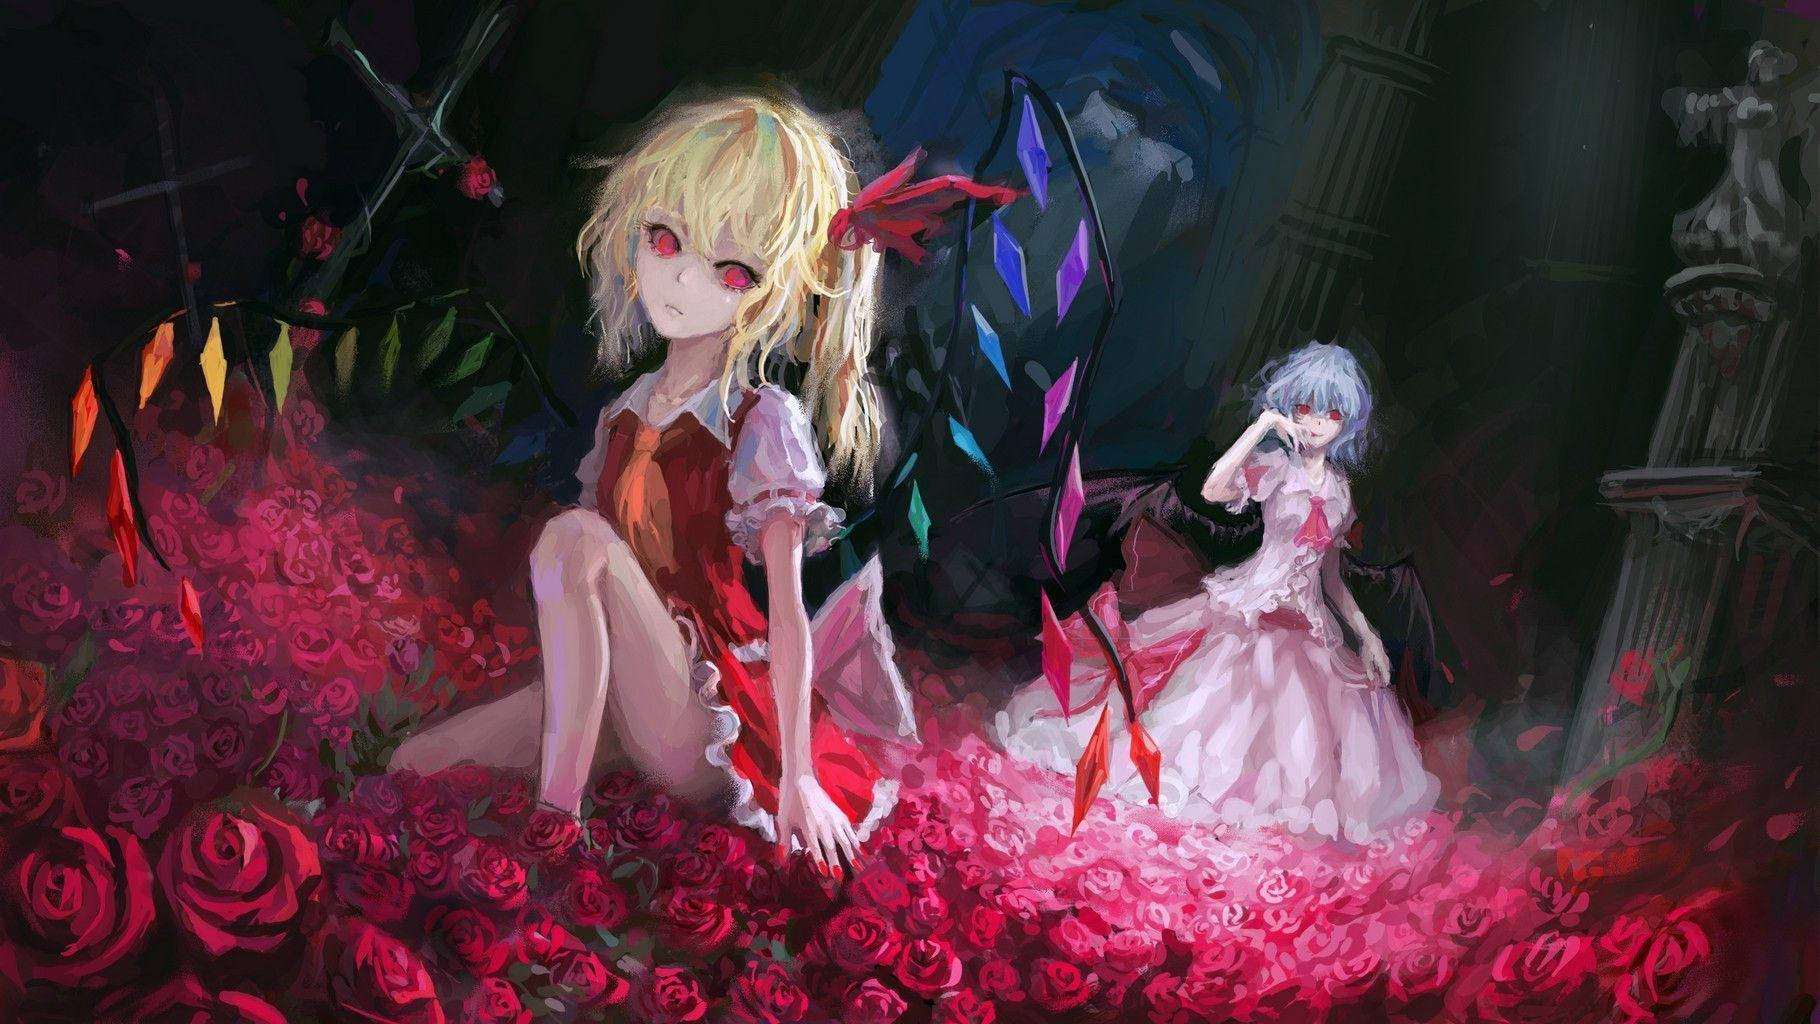 Flandre And Remilia On Roses